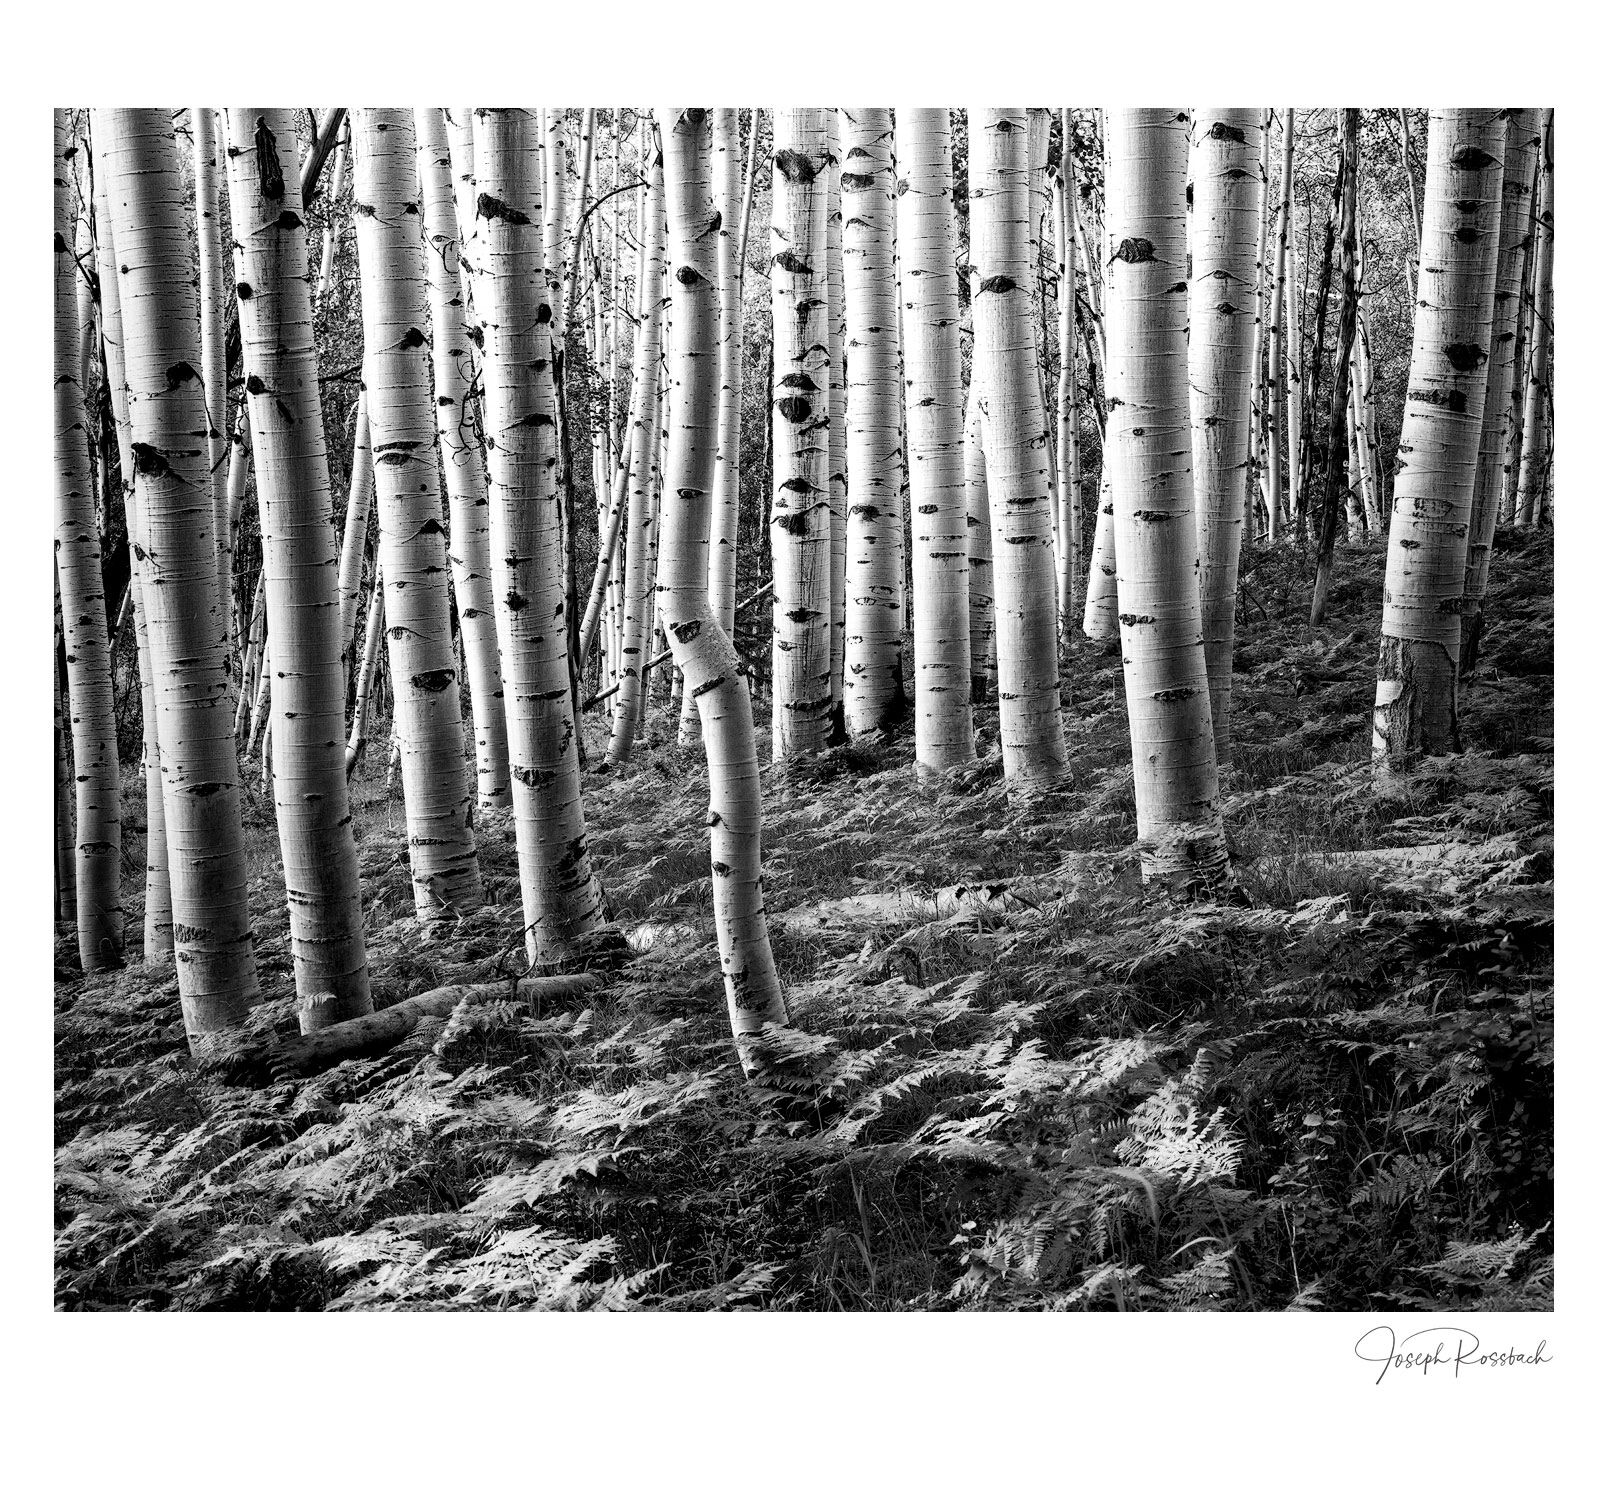 Zone VI,  210mm, Yellow Filter, 27 seconds at F32, TMAX 100